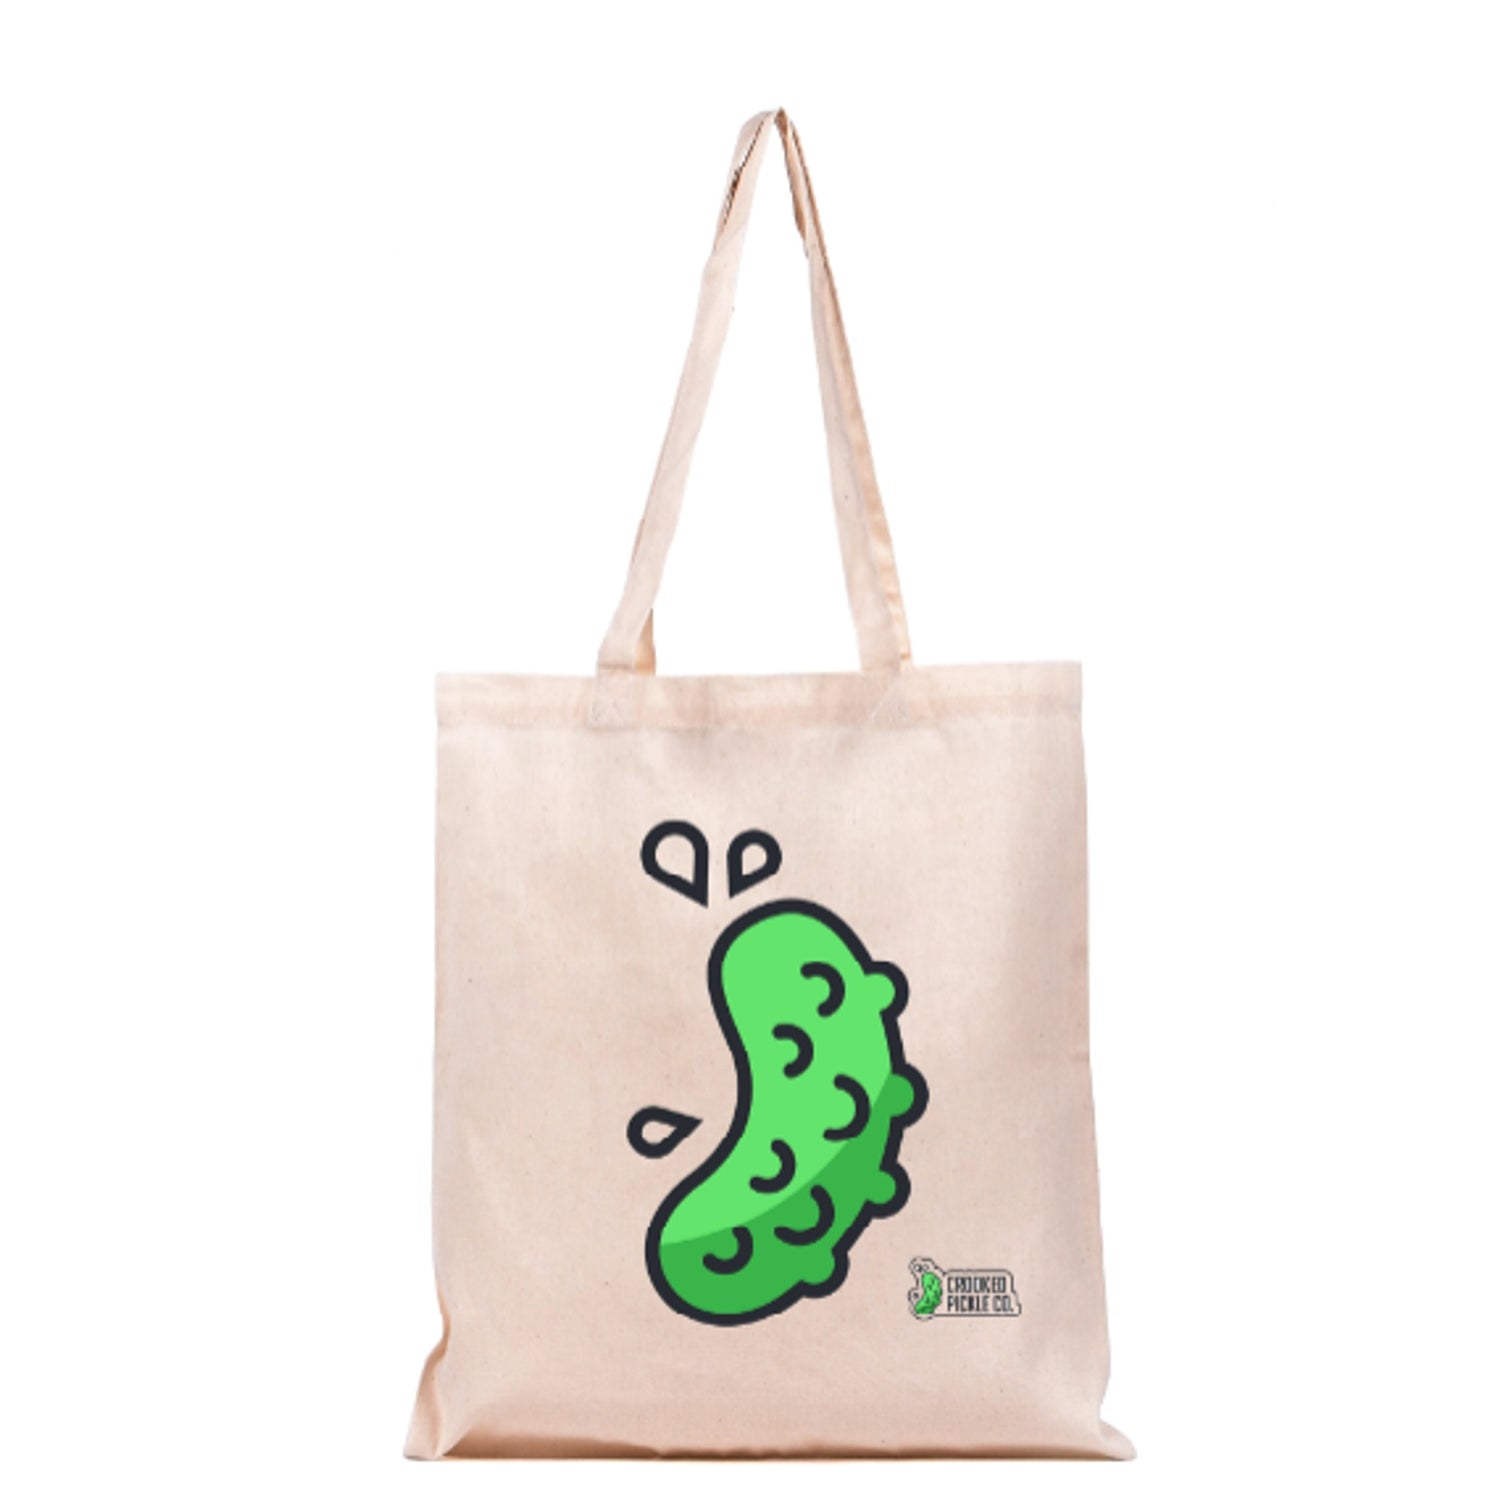 Funky tote bag for shopping pickles.